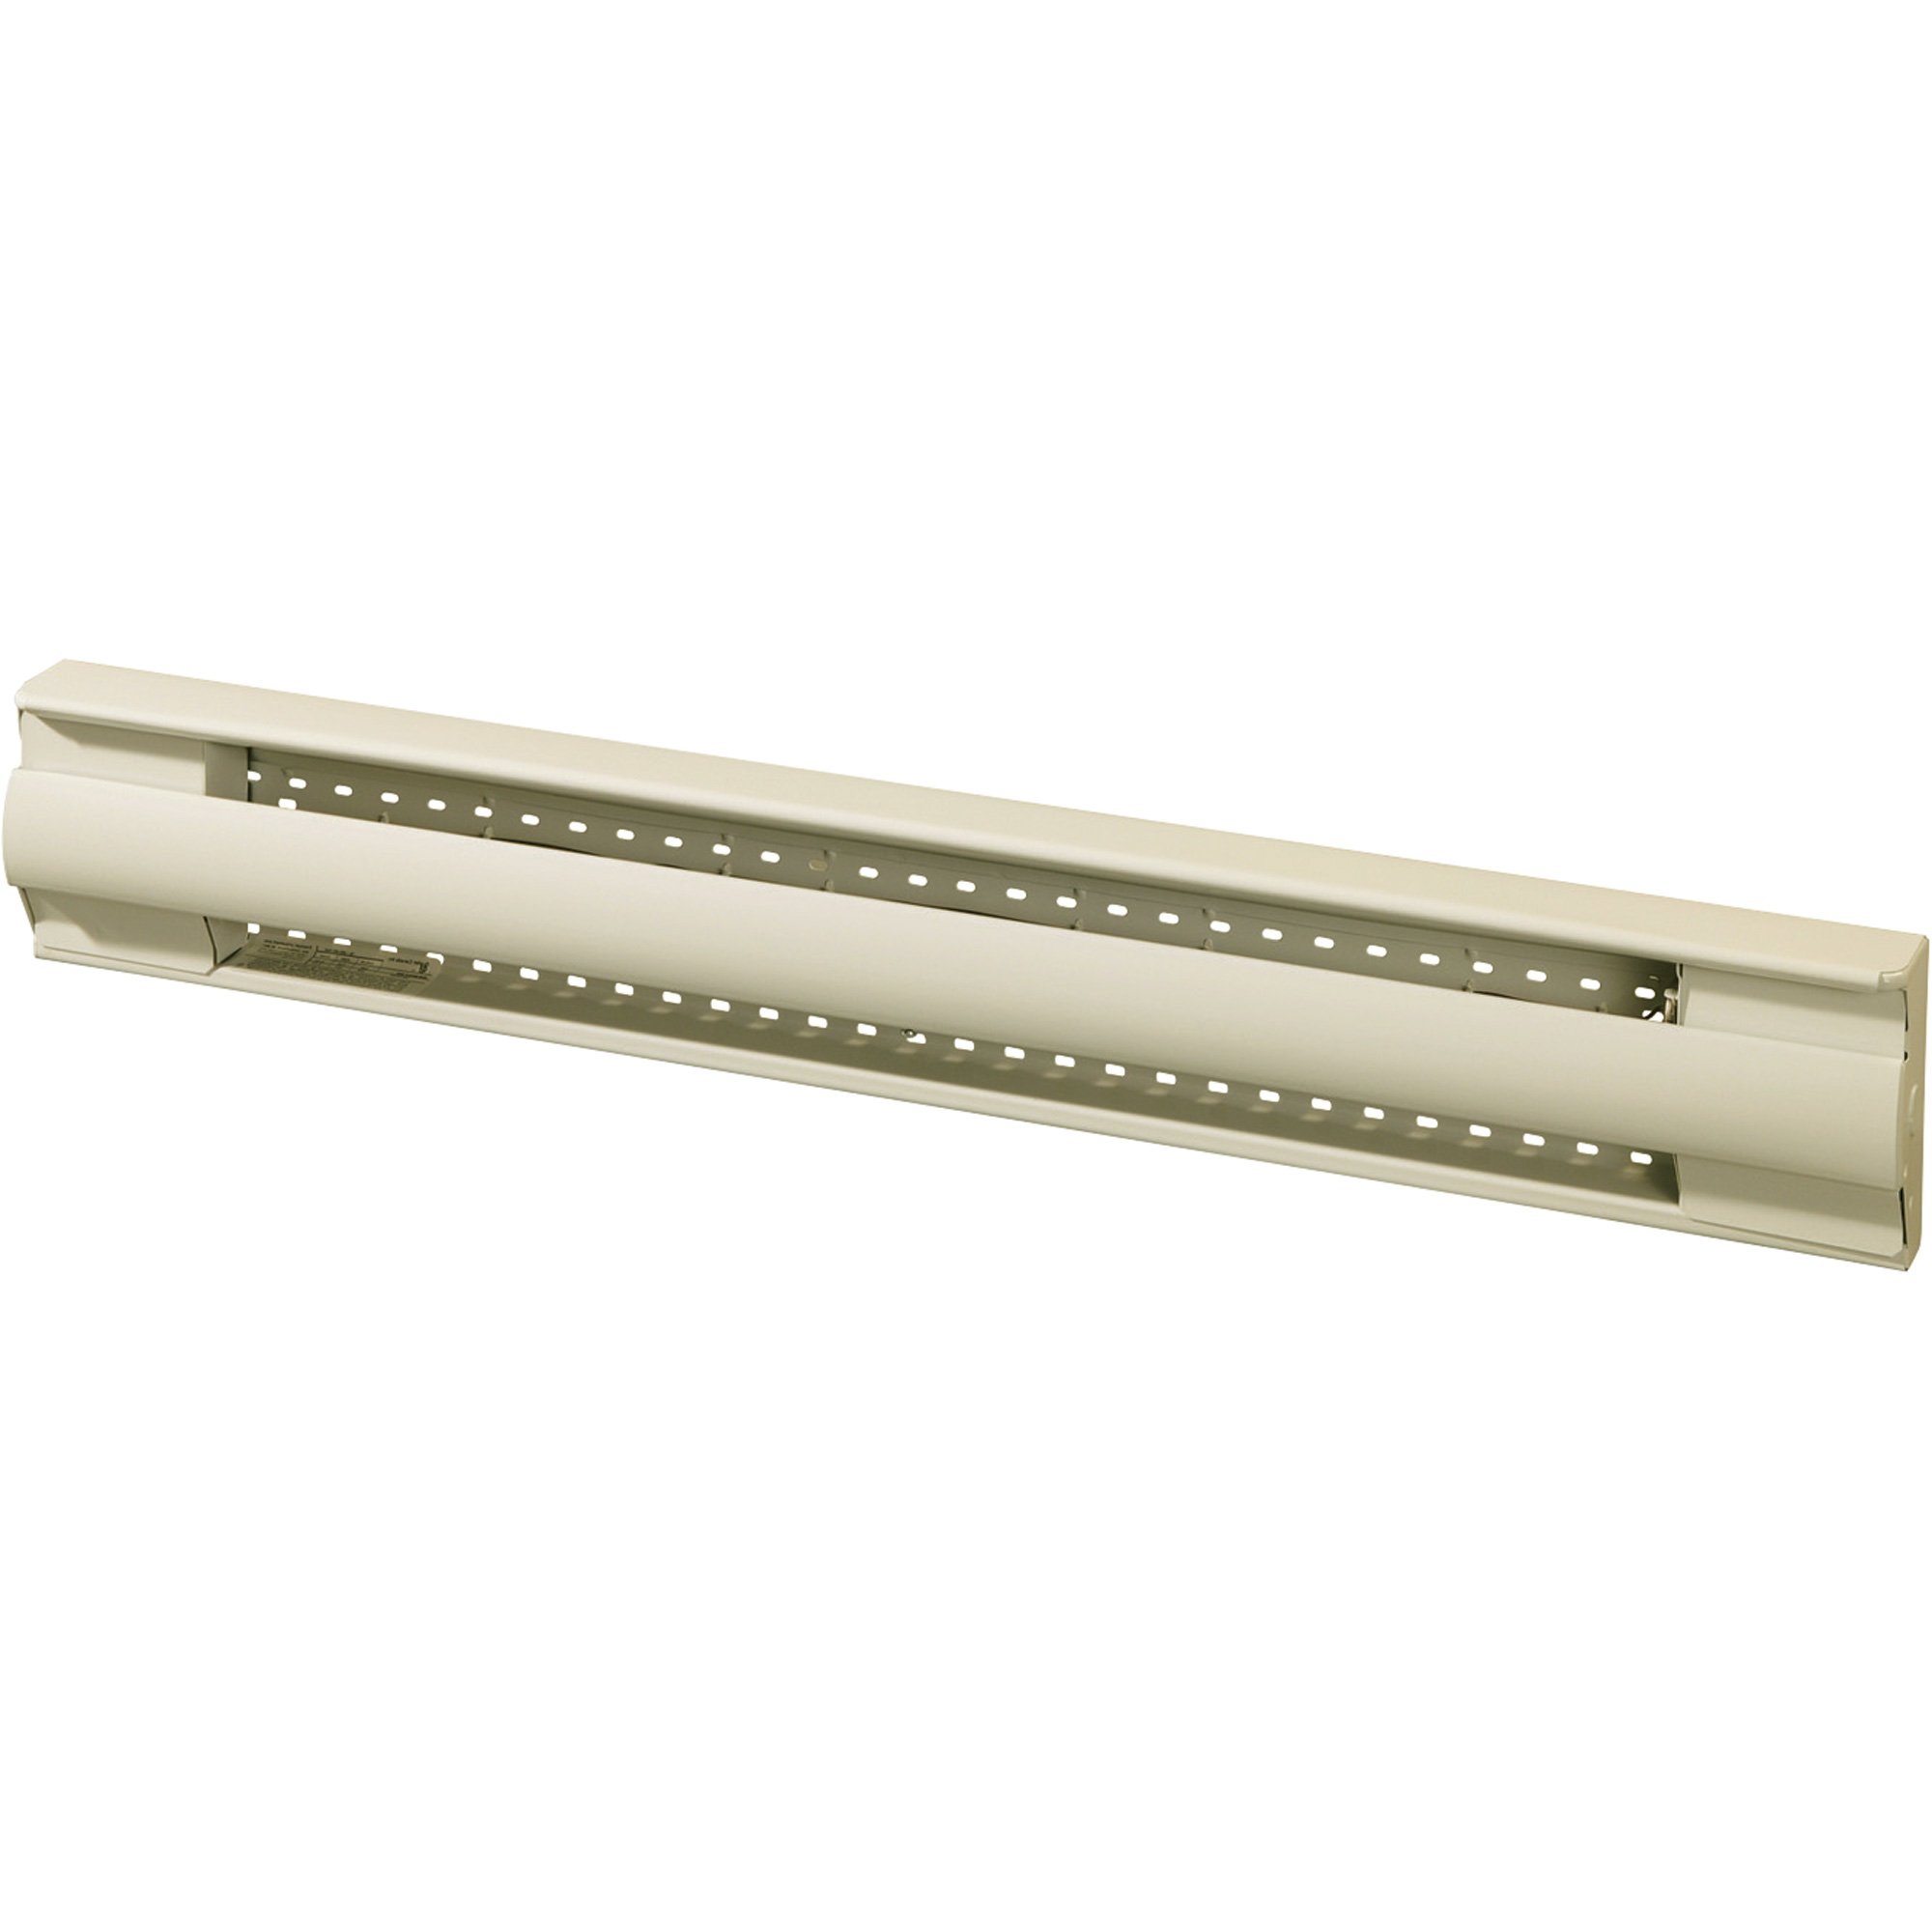 OUE RBH0500AM 30" STANDARD BASEBOARD HEATER 500/375W 240/208V ALMOND 702MM